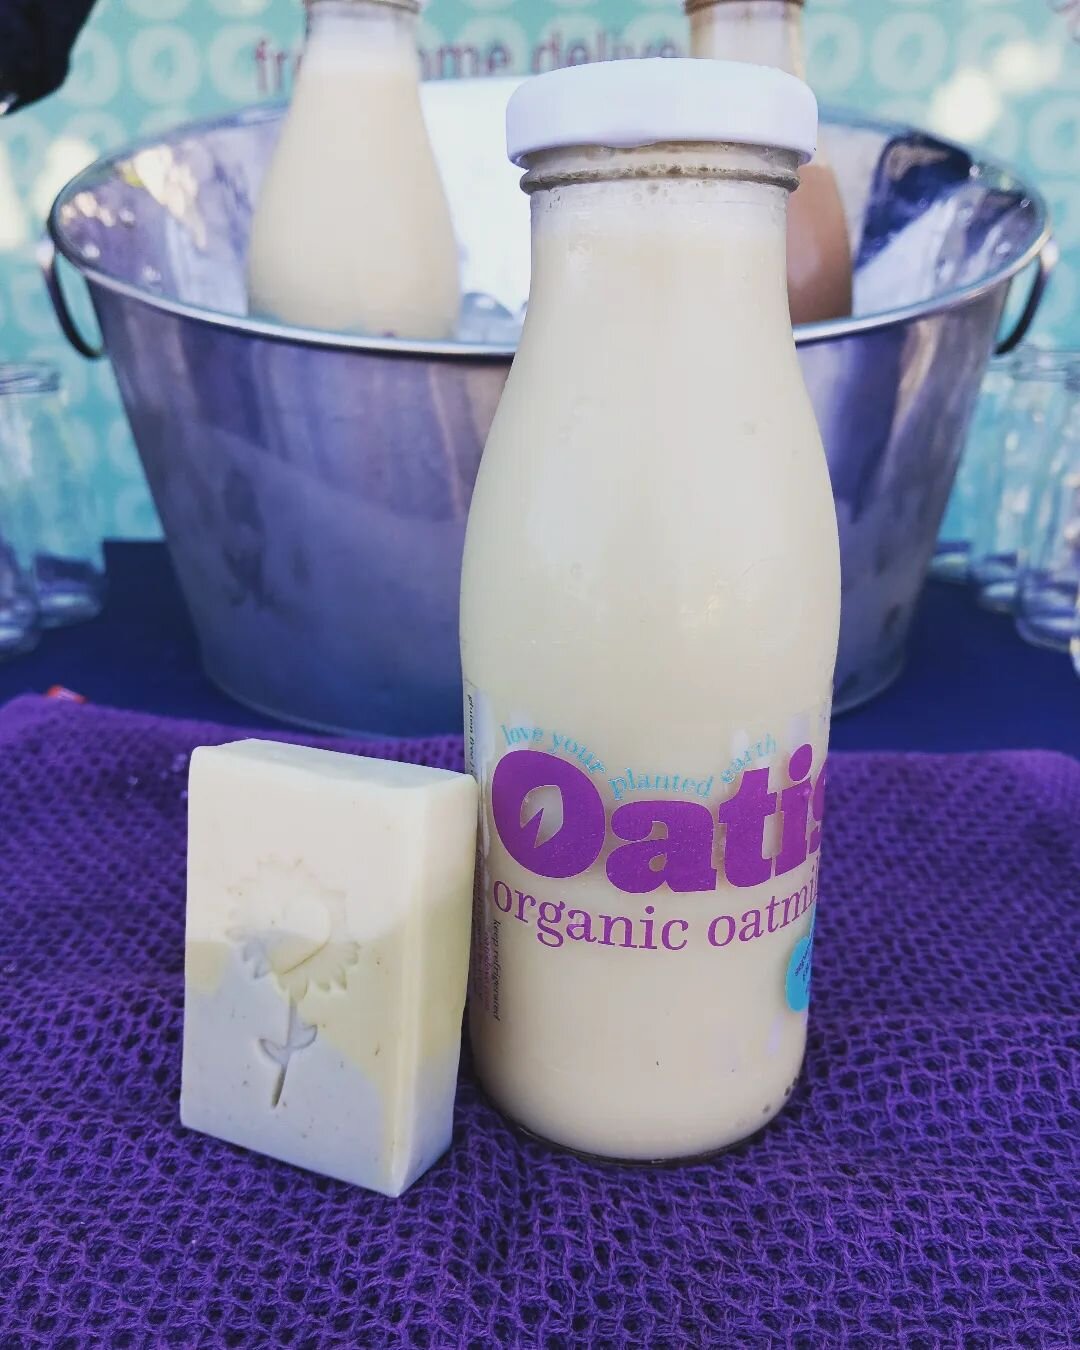 Beyond excited to share that @ejsfarmdenver used Oatis to make soap bar!!!! It smells amazing, rinses clean, and leaves the skin feeling soft! Stop and check it out at @cityparkfarmersmarket.

#community #local #zerowaste #goodbyeplastics #sustainabi